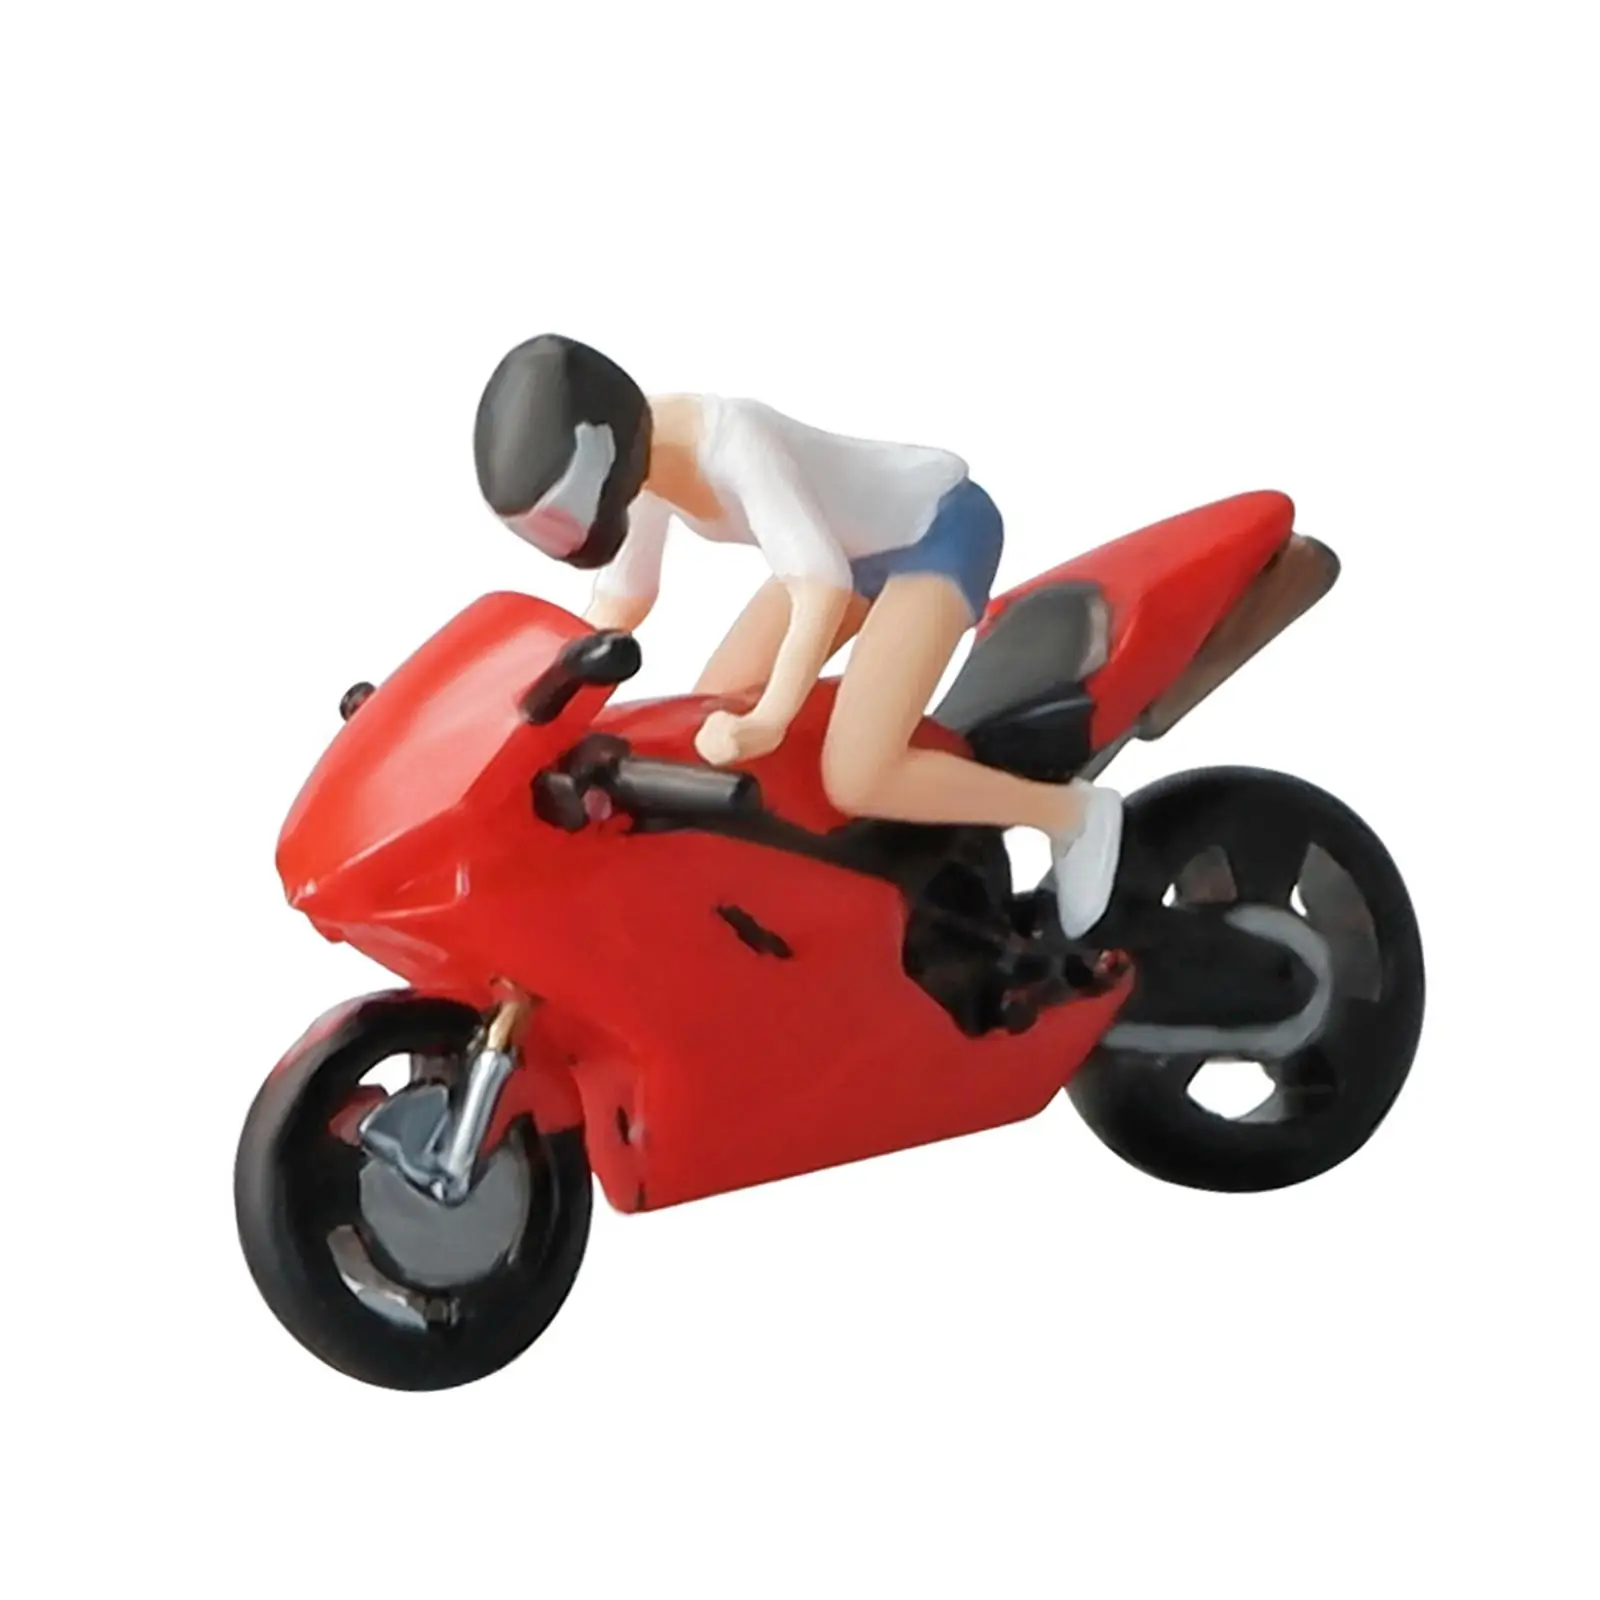 1/64 Motorcycle with Figure Tiny People Trains Architectural Painted Figures 1/64 Scale Model Figures DIY Projects Accessory